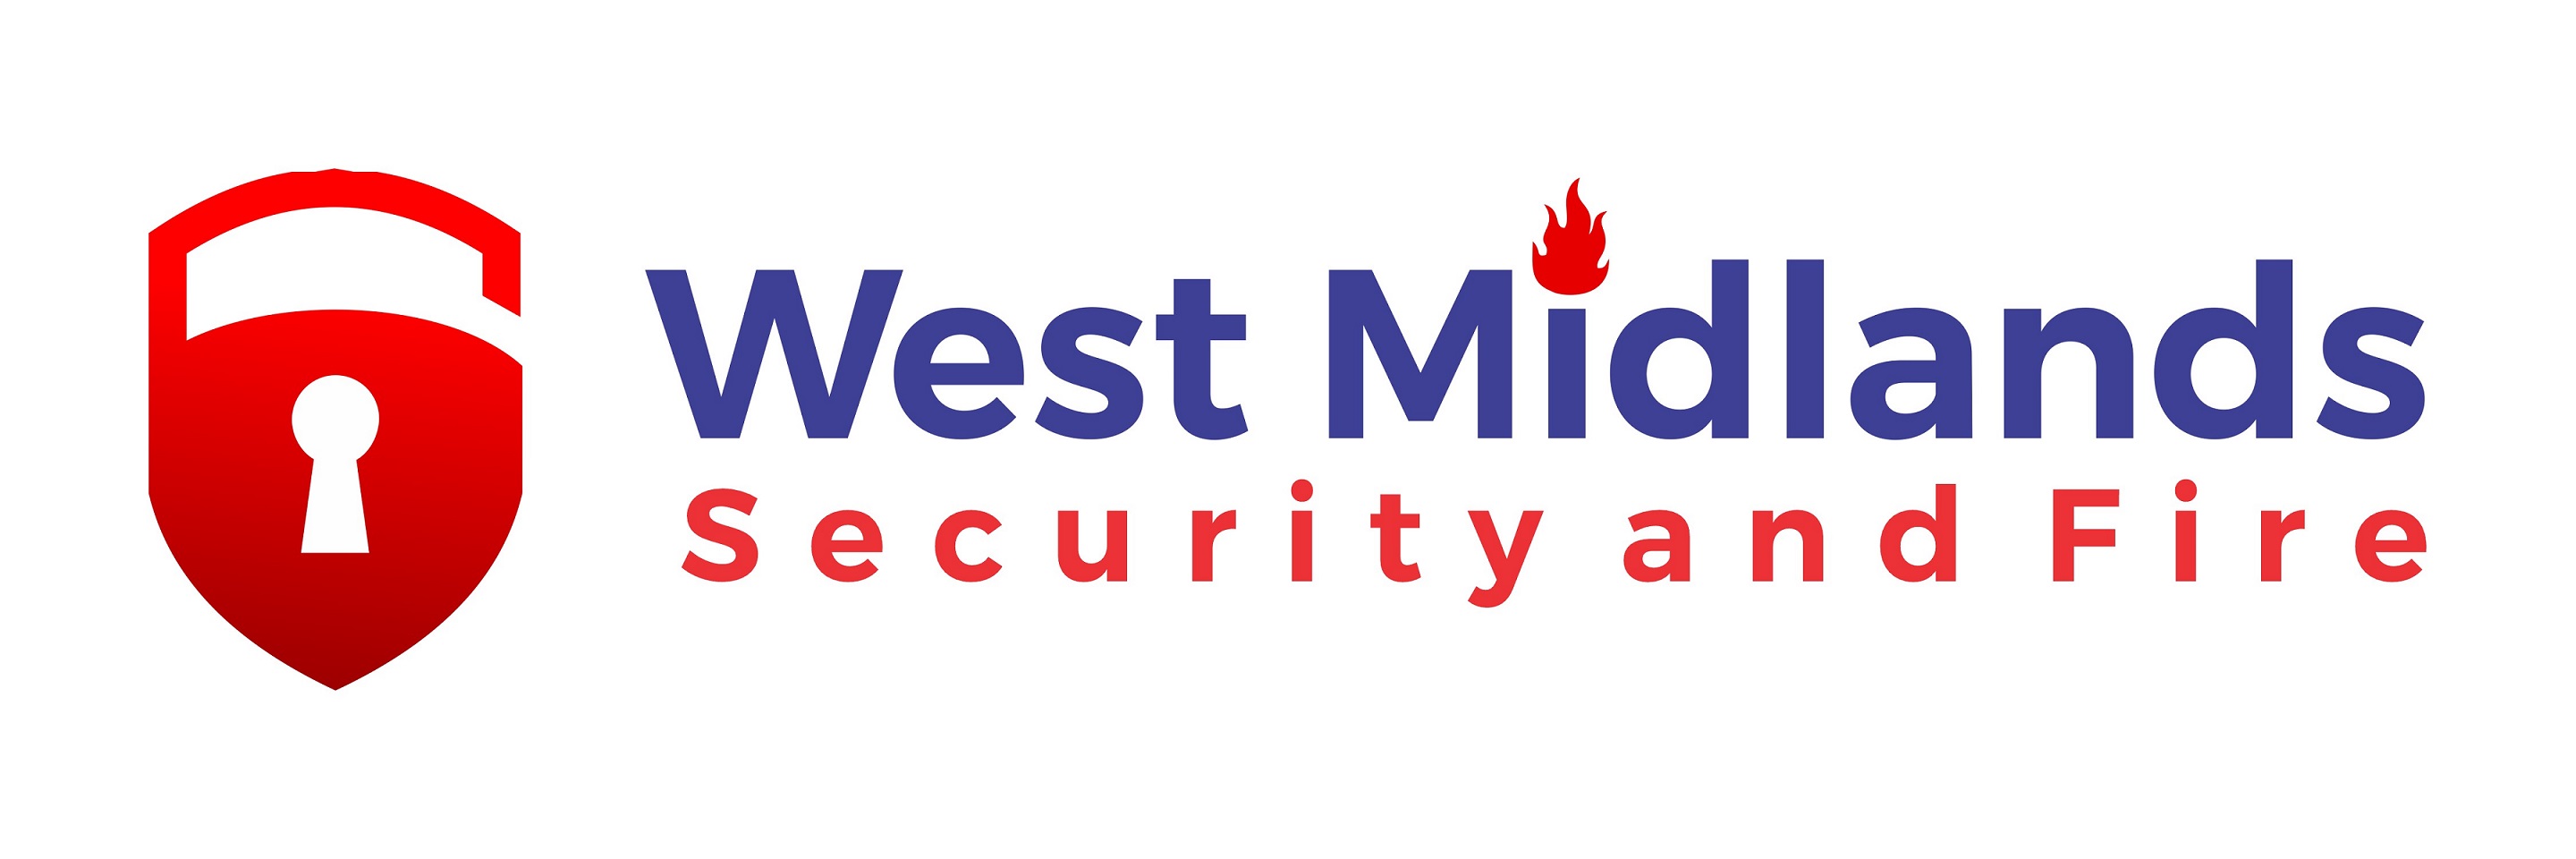 west midlands security and fire